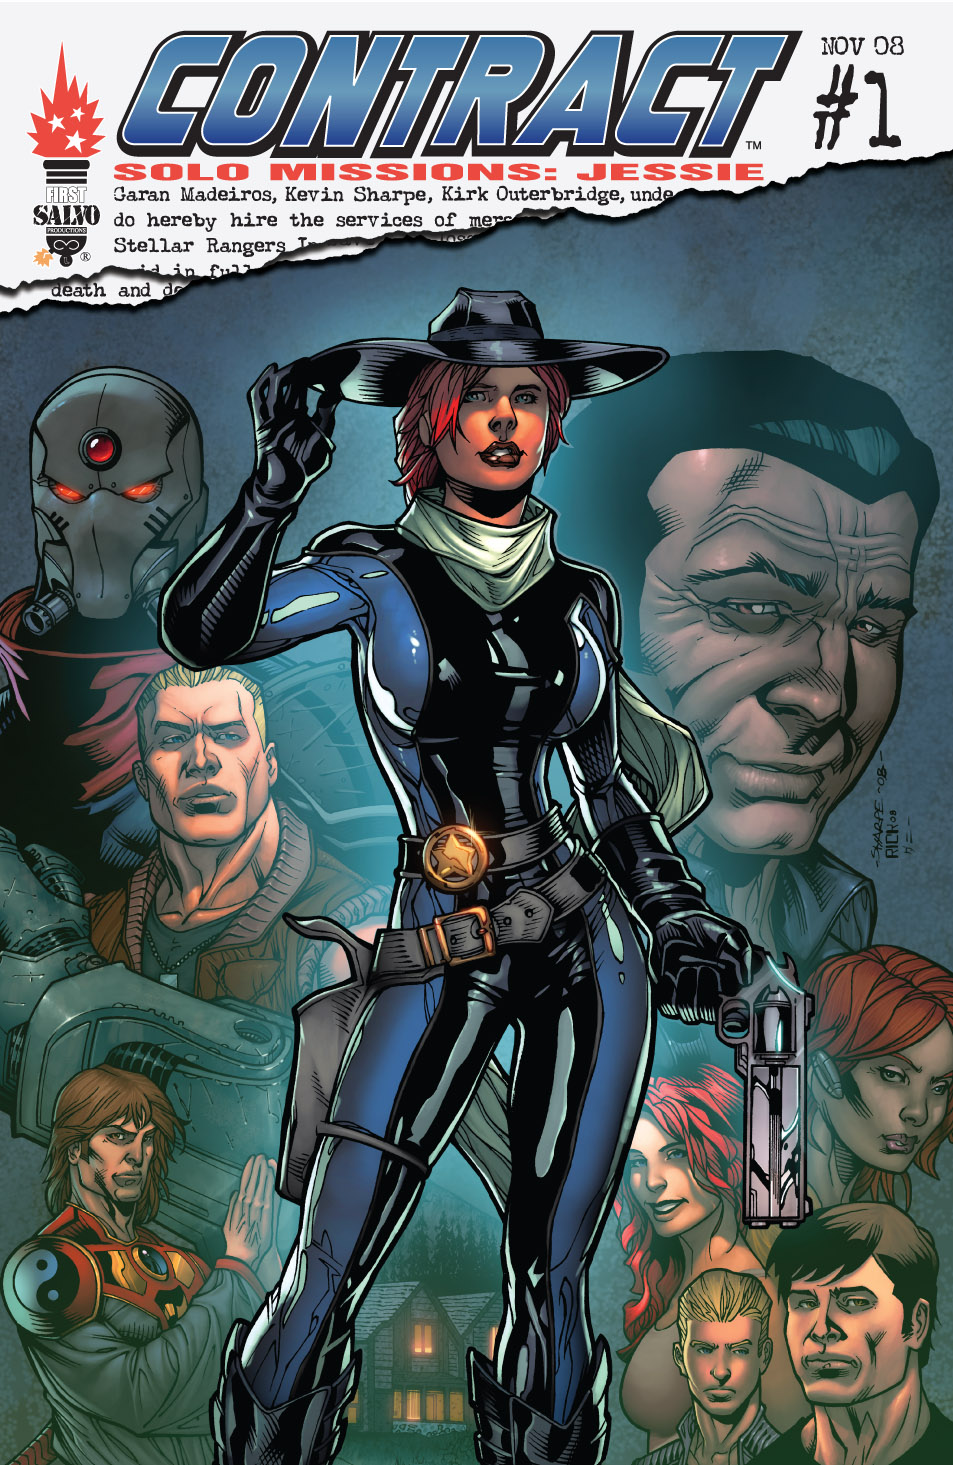 Read online Contract Solo Mission: Jessie comic -  Issue # Full - 1